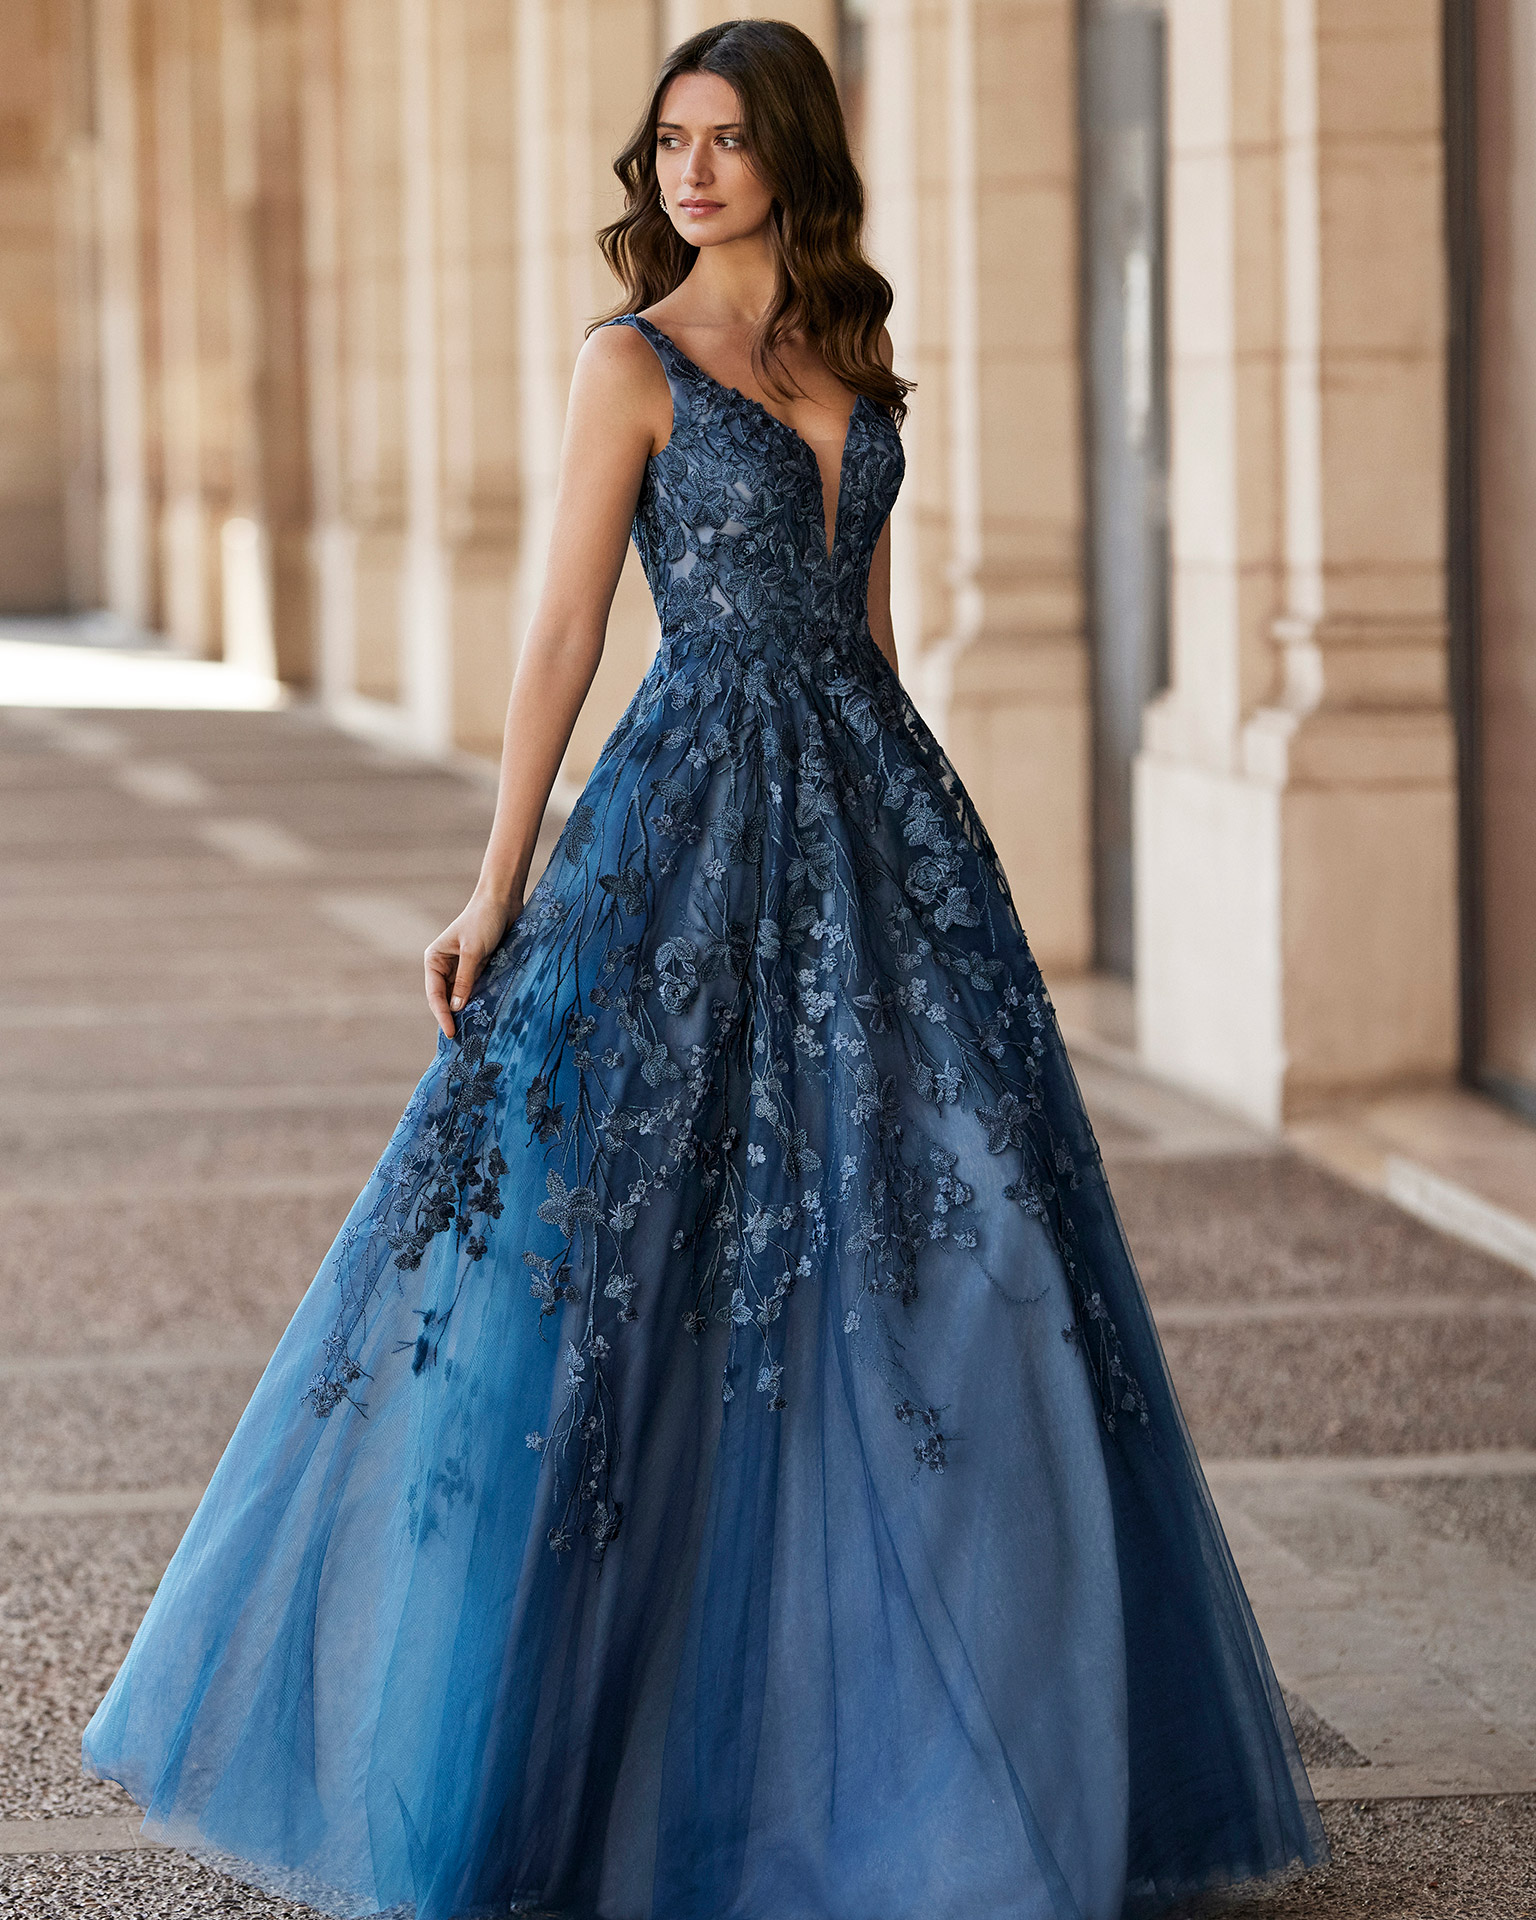 Long princess-style evening dress, made of tulle. Marfil Barcelona design with a lace bodice, a V-neckline, and an open back. MARFIL_BARCELONA.